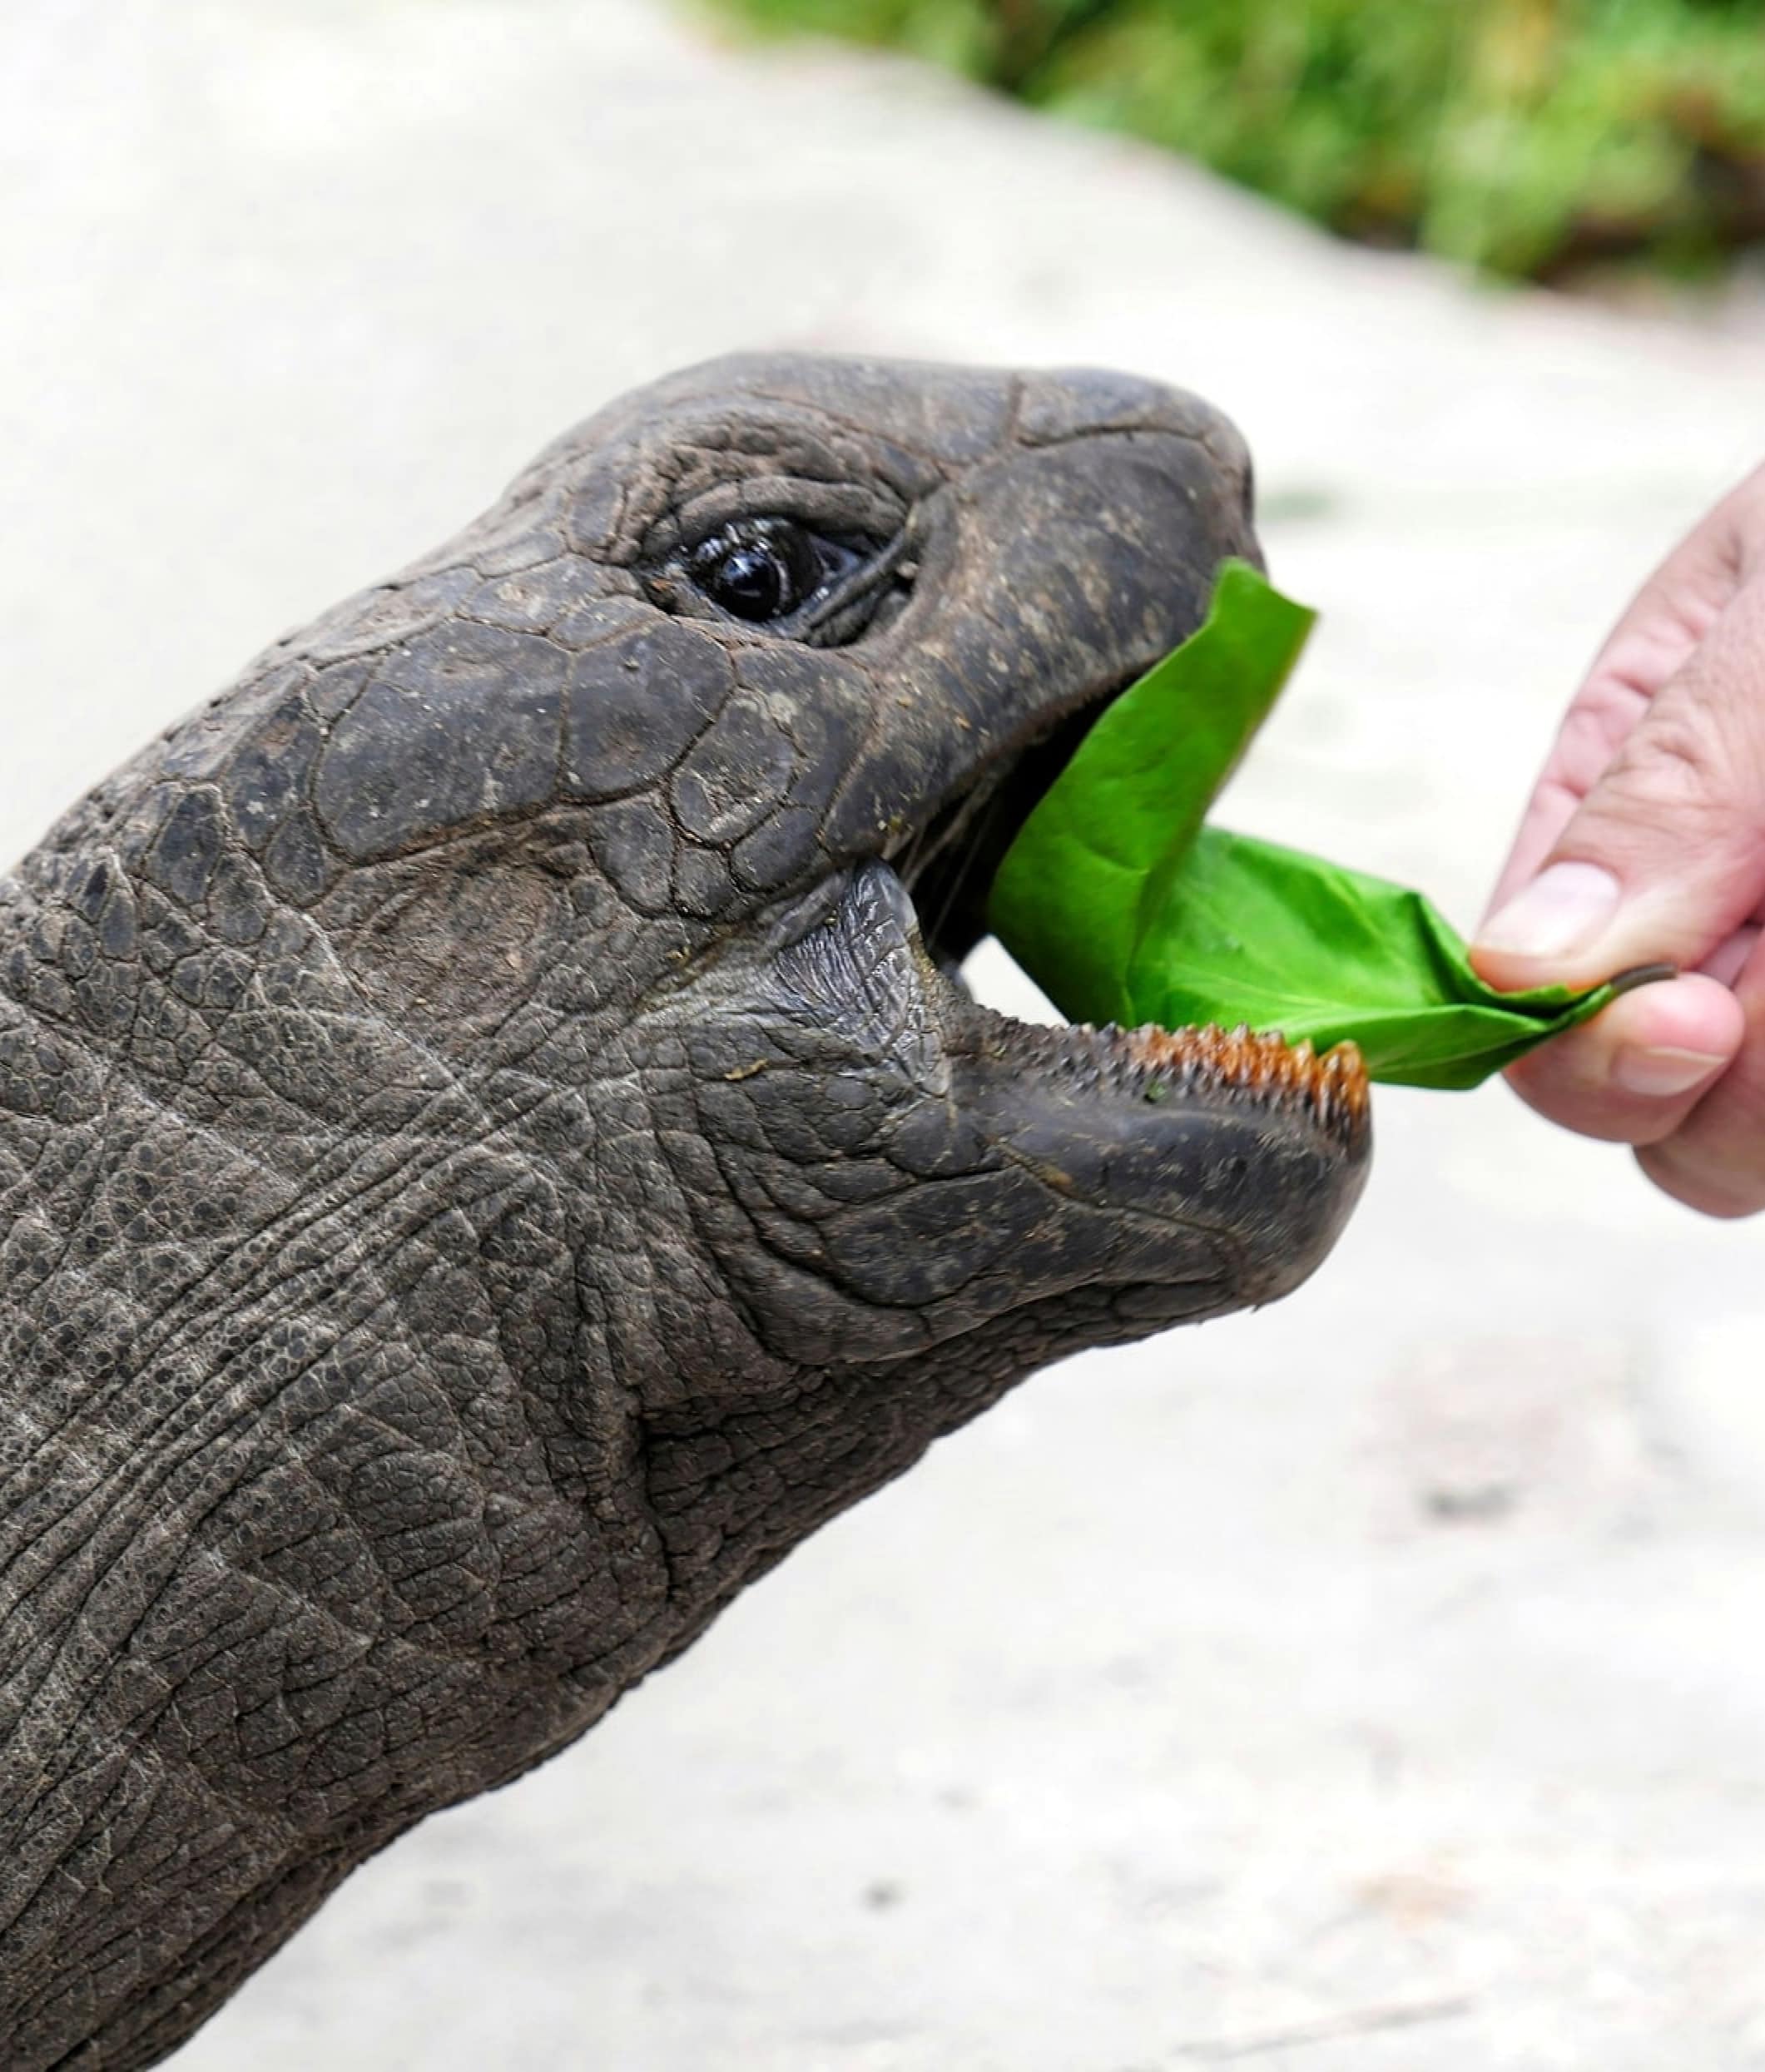 One of the very large turtles of the Seychelles eating leaves from the hands of visitors